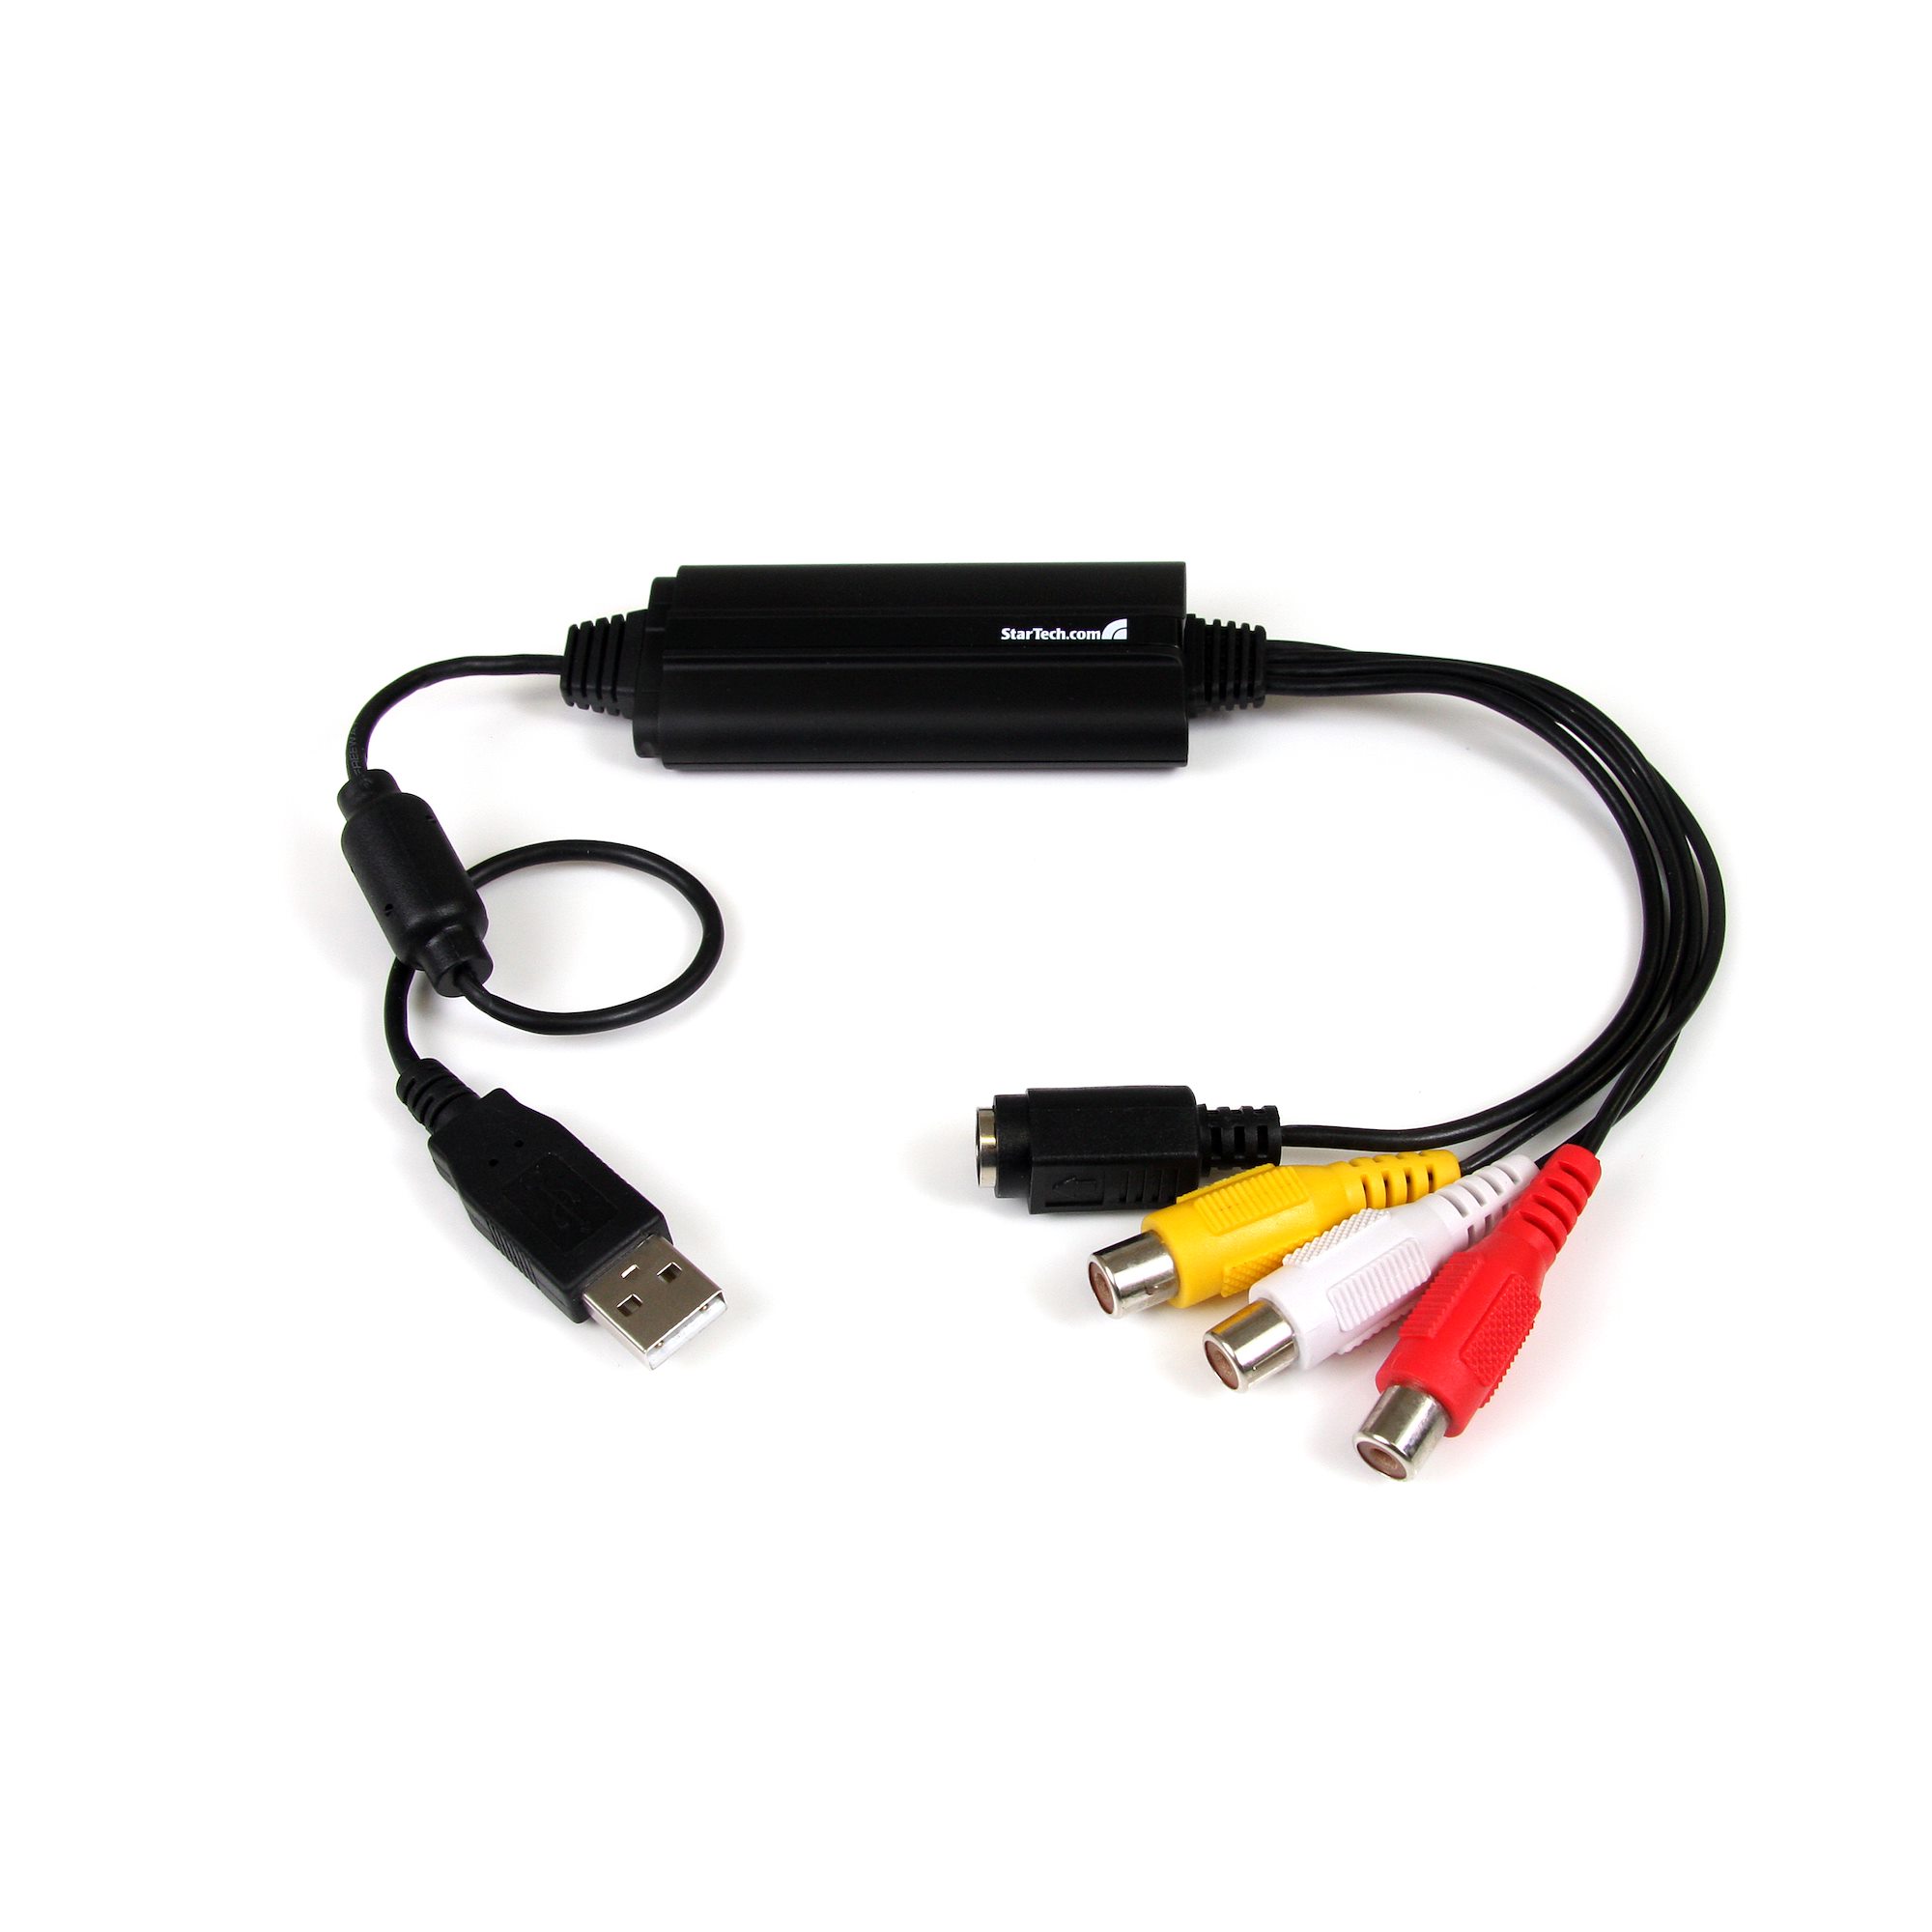 Product  StarTech.com USB Video Capture Adapter Cable, S-Video